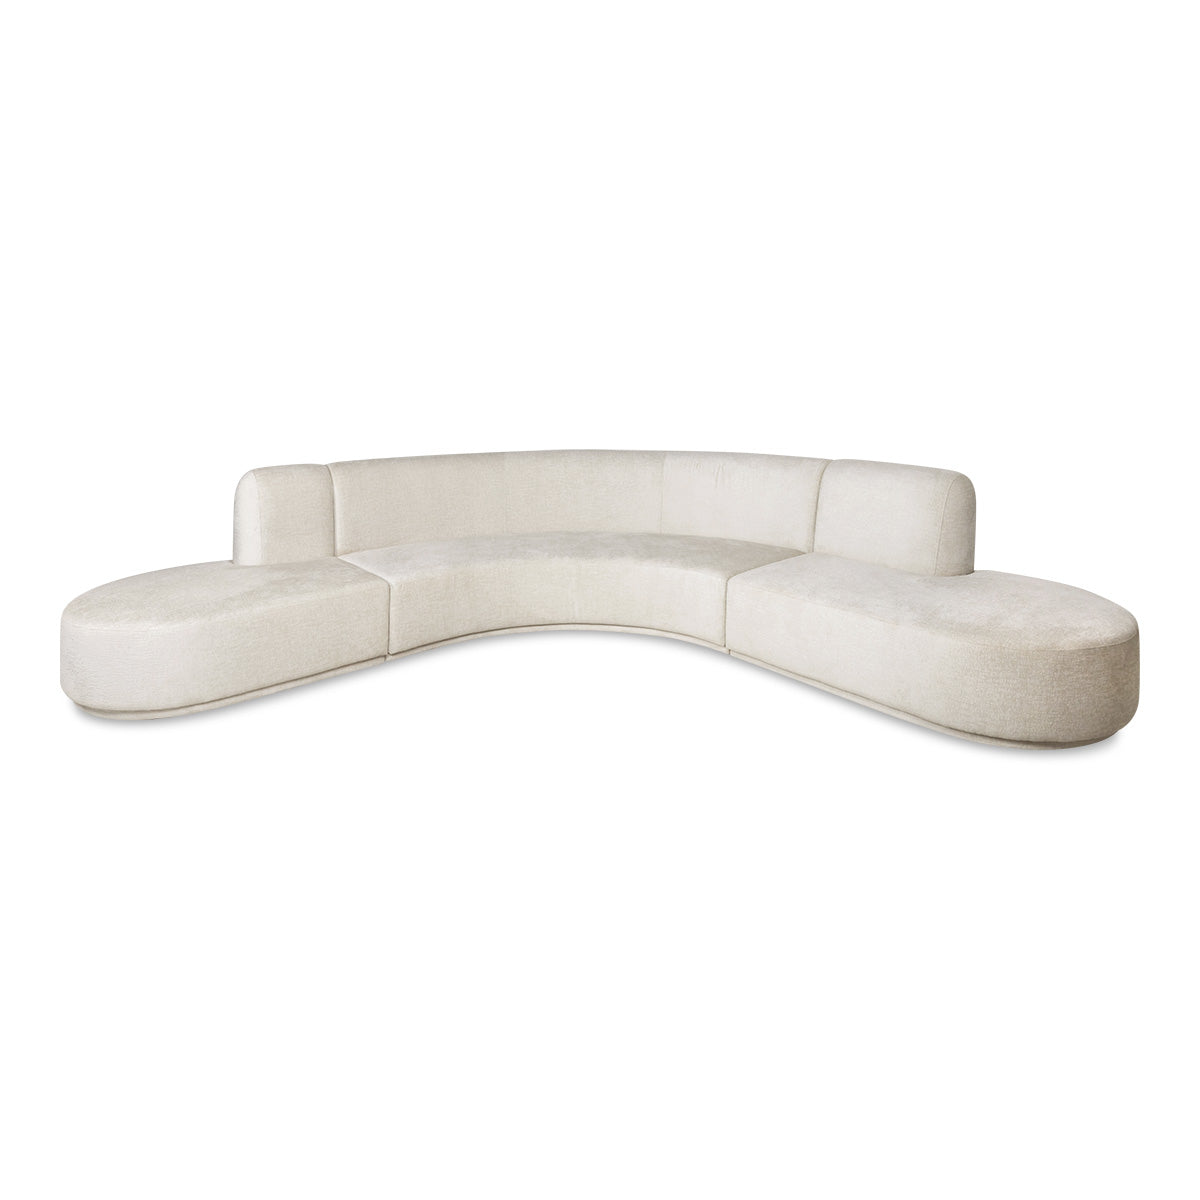 Sag Harbor 3 Piece Sectional in Off White Poodle